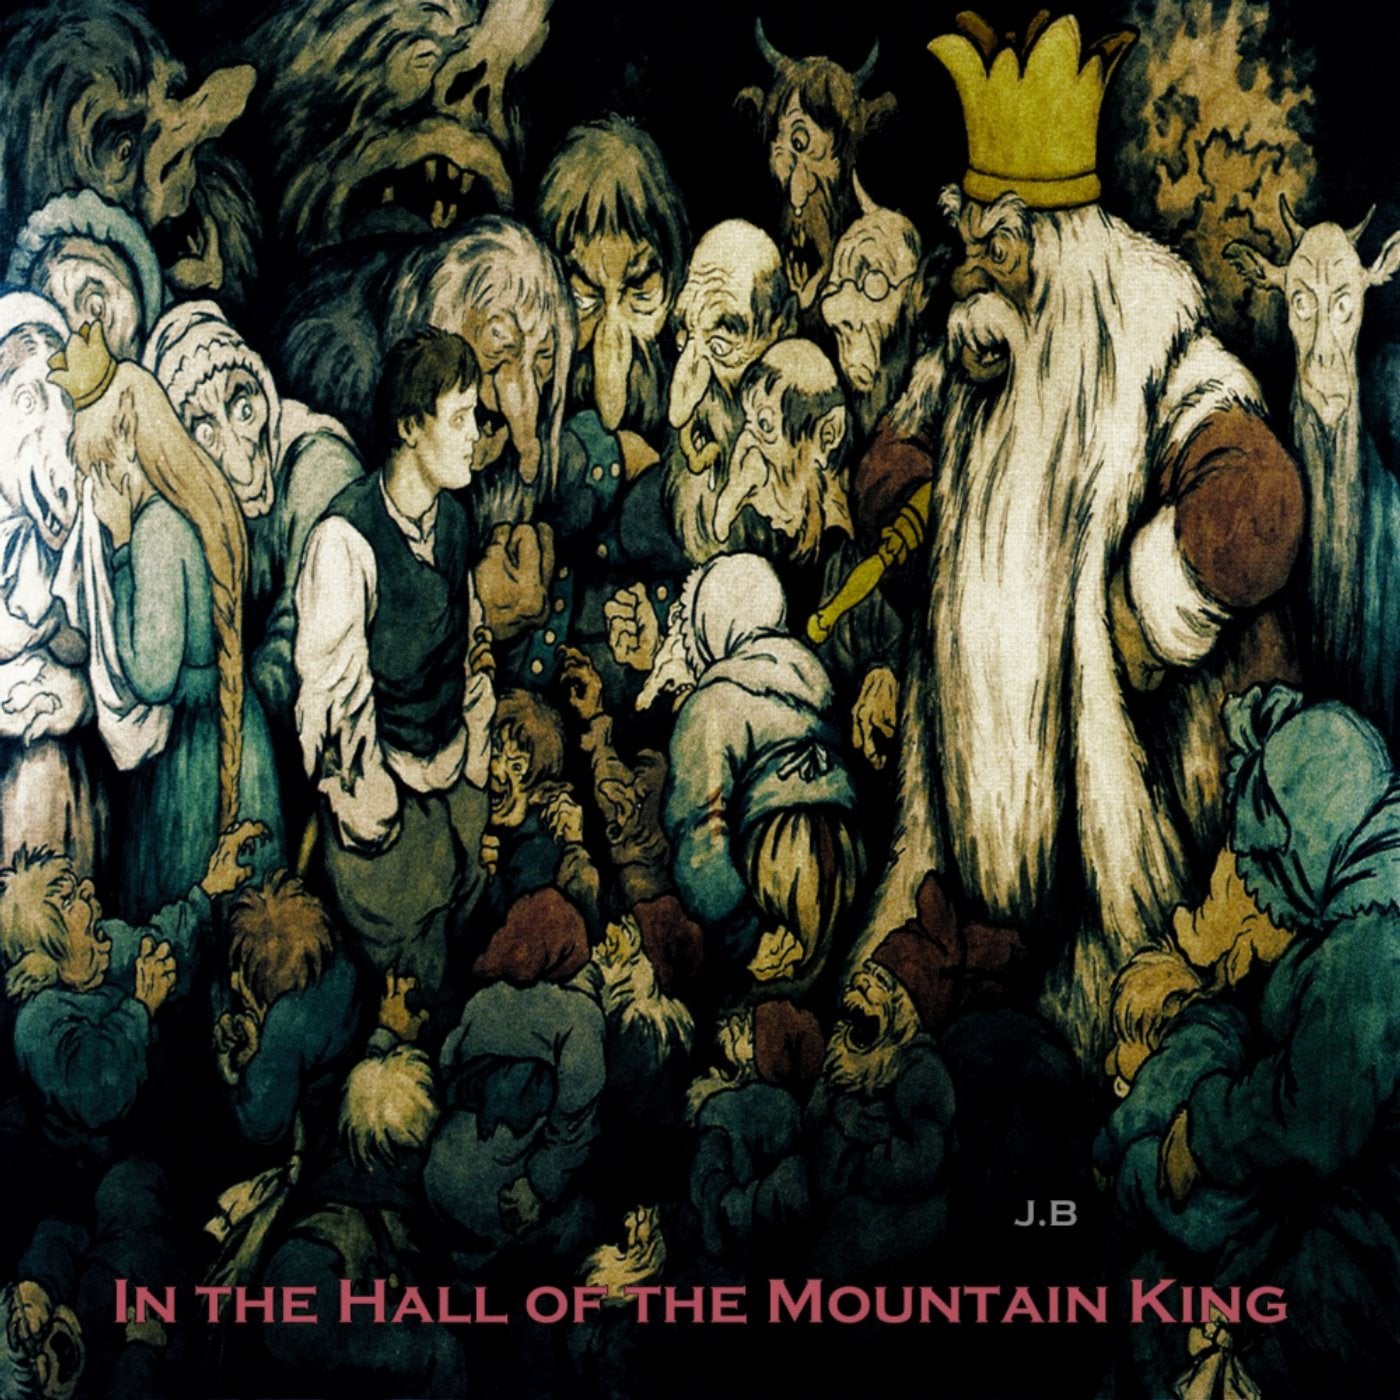 In The Hall Of The Mountain King